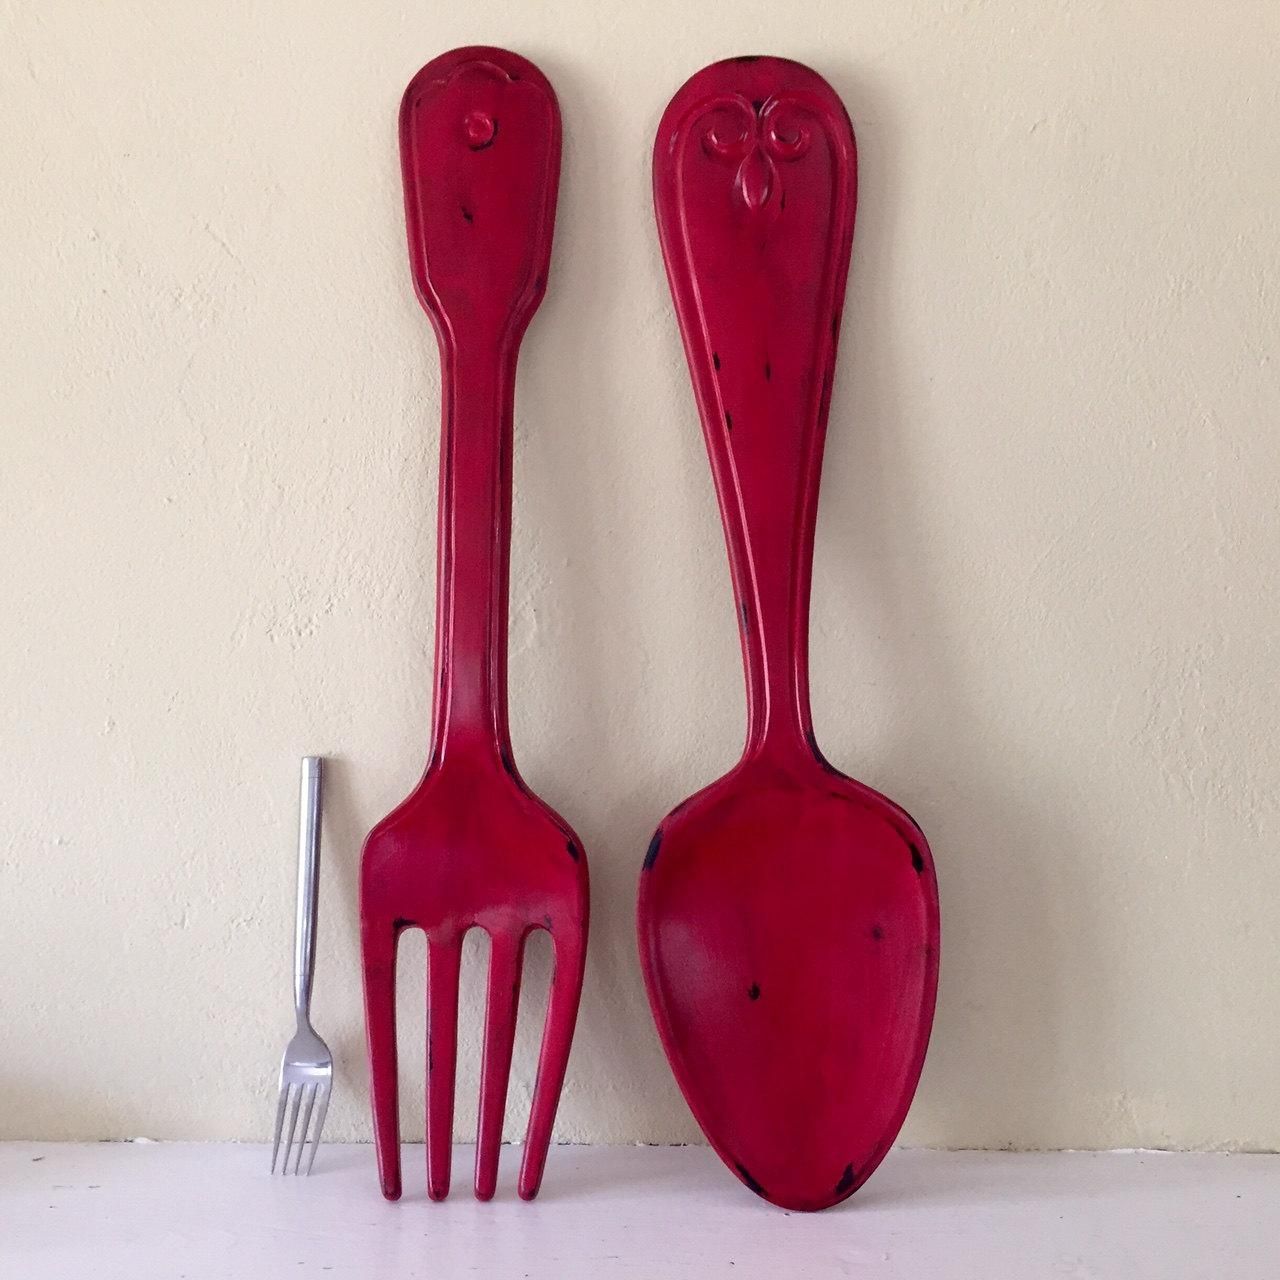 Large Spoon And Fork Wall Art : Oversized Spoon And Fork Wall For Large Spoon And Fork Wall Art (View 20 of 20)